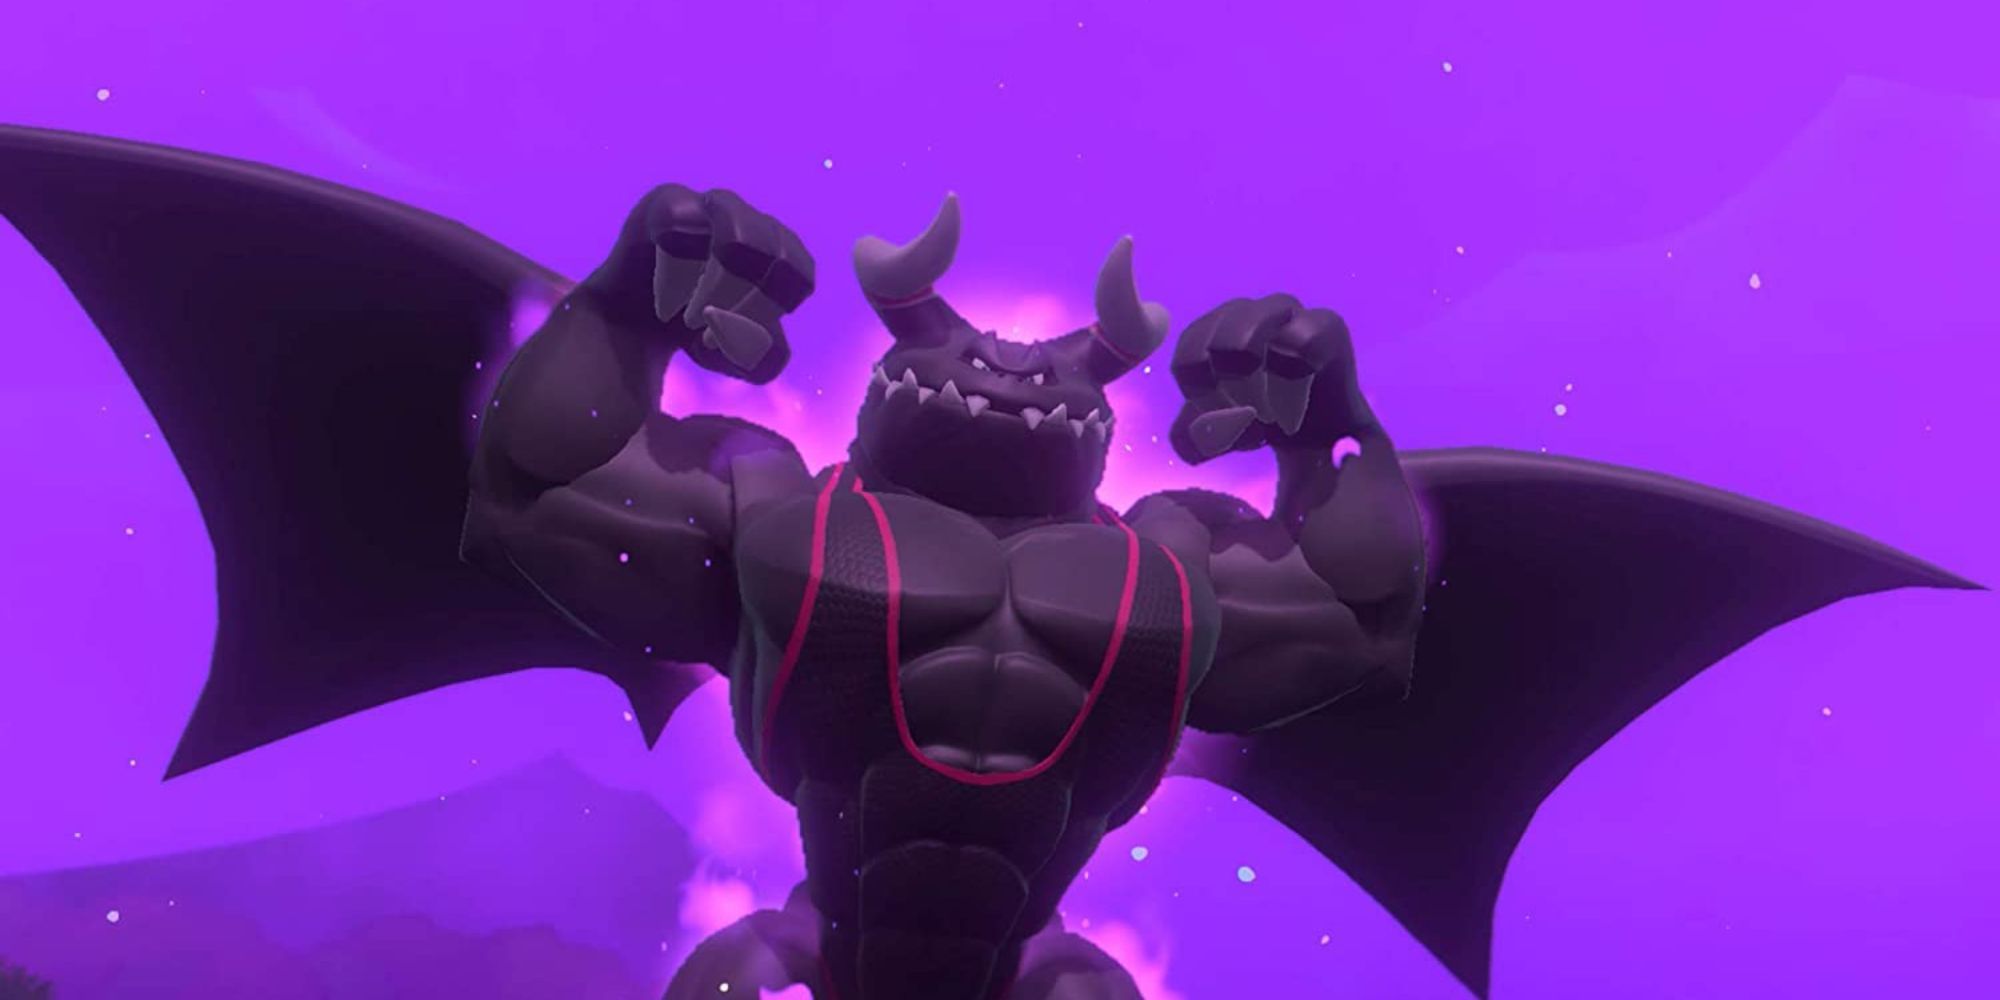 A purple aura surrounds Dragaux as he flexes at night